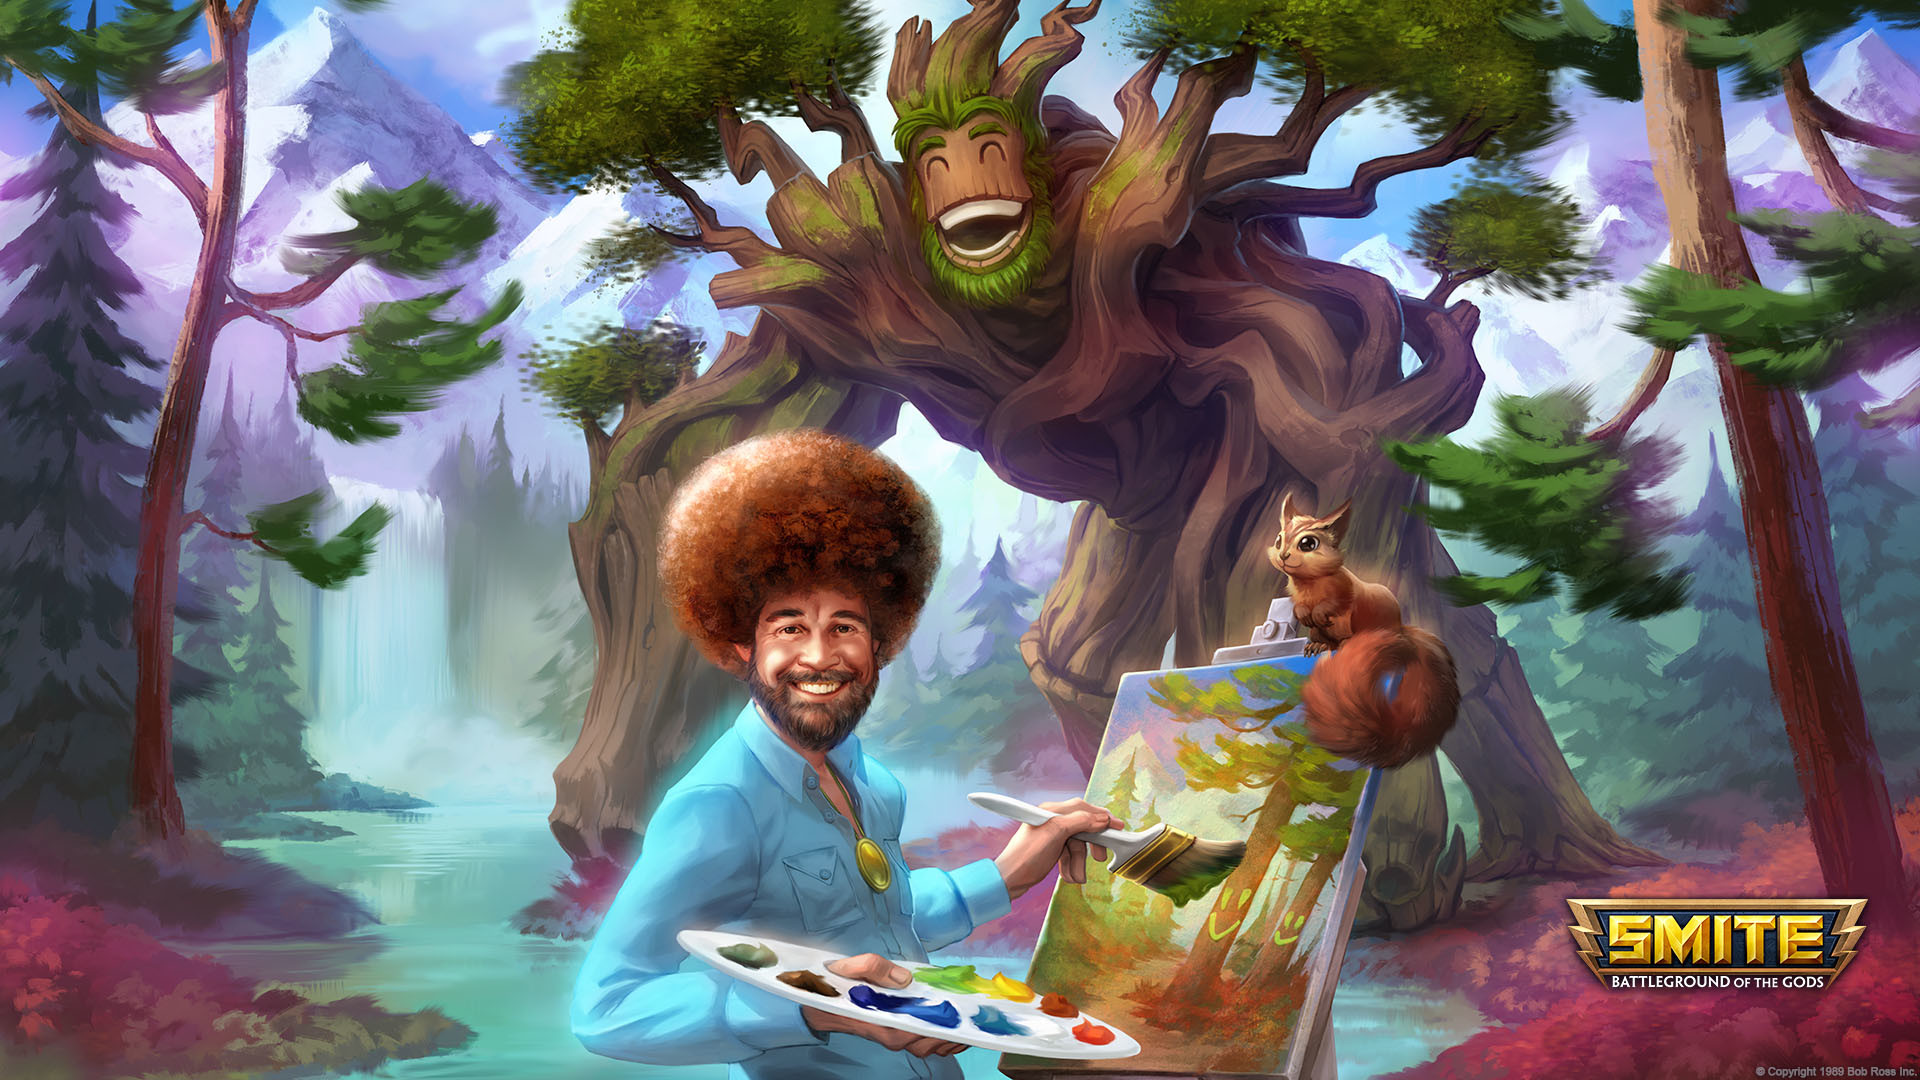 'Smite' adds Bob Ross as a paint-throwing playable character